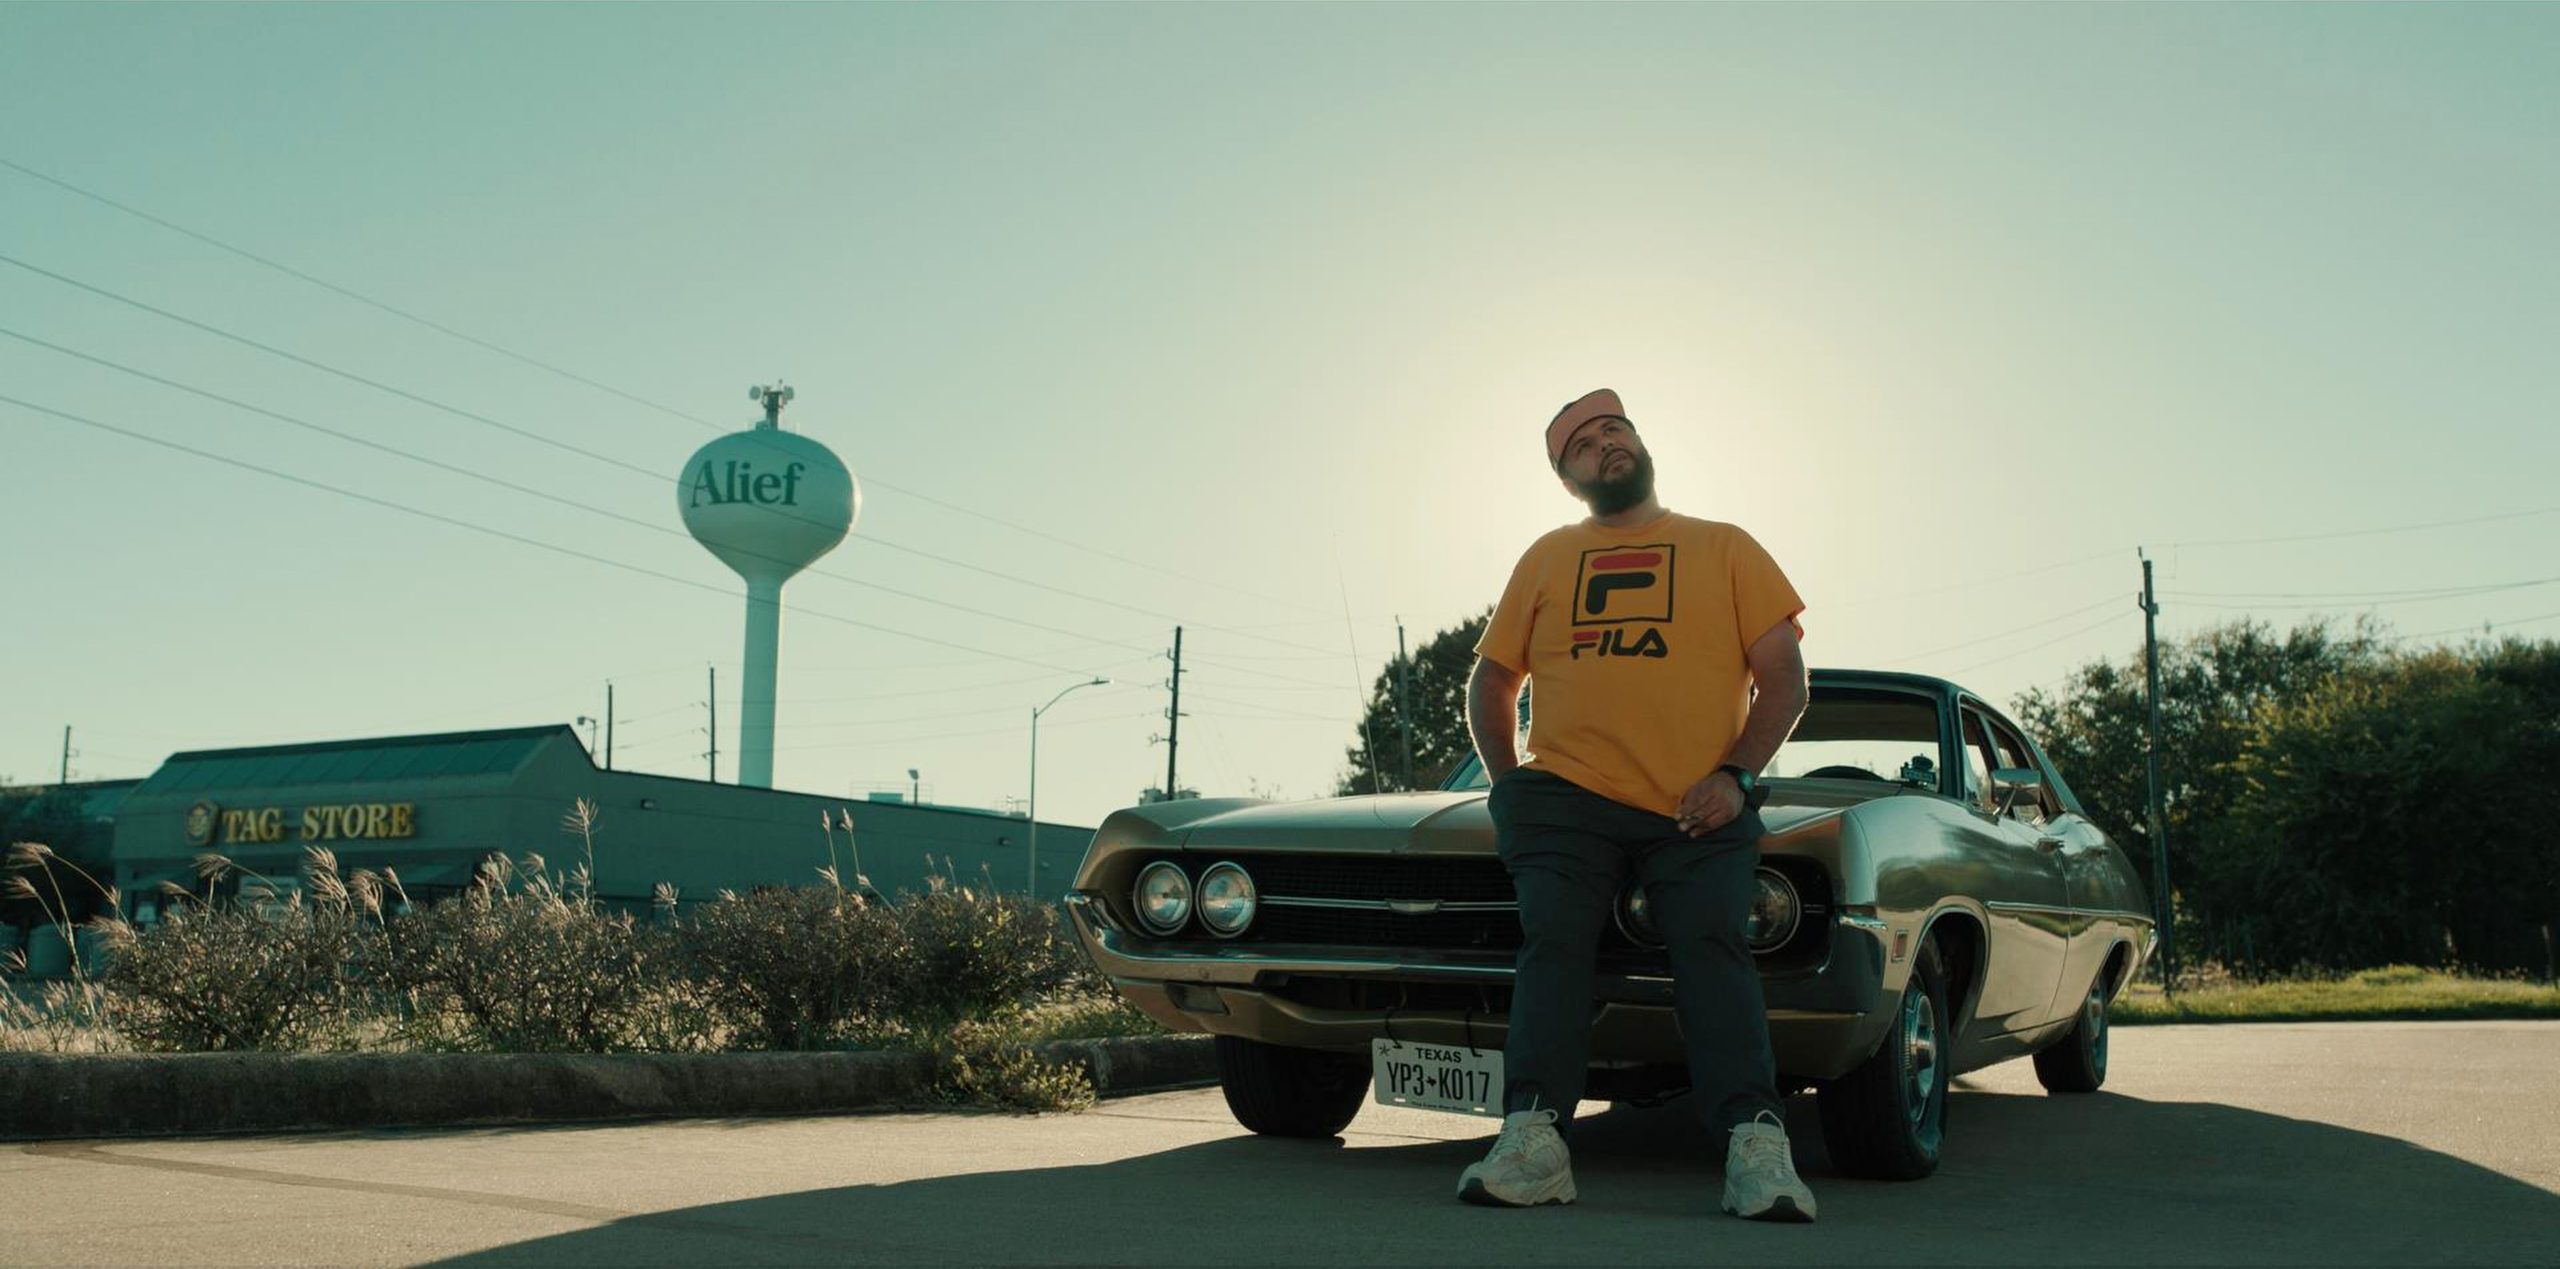 Mo, a Palestinian American with a thick short beard, leans against a Dodge challenger, near a Houston suburban strip mall with a water tower in the background. He's wearing a white baseball cap, a yellow FILA shirt and baggy blue jeans.